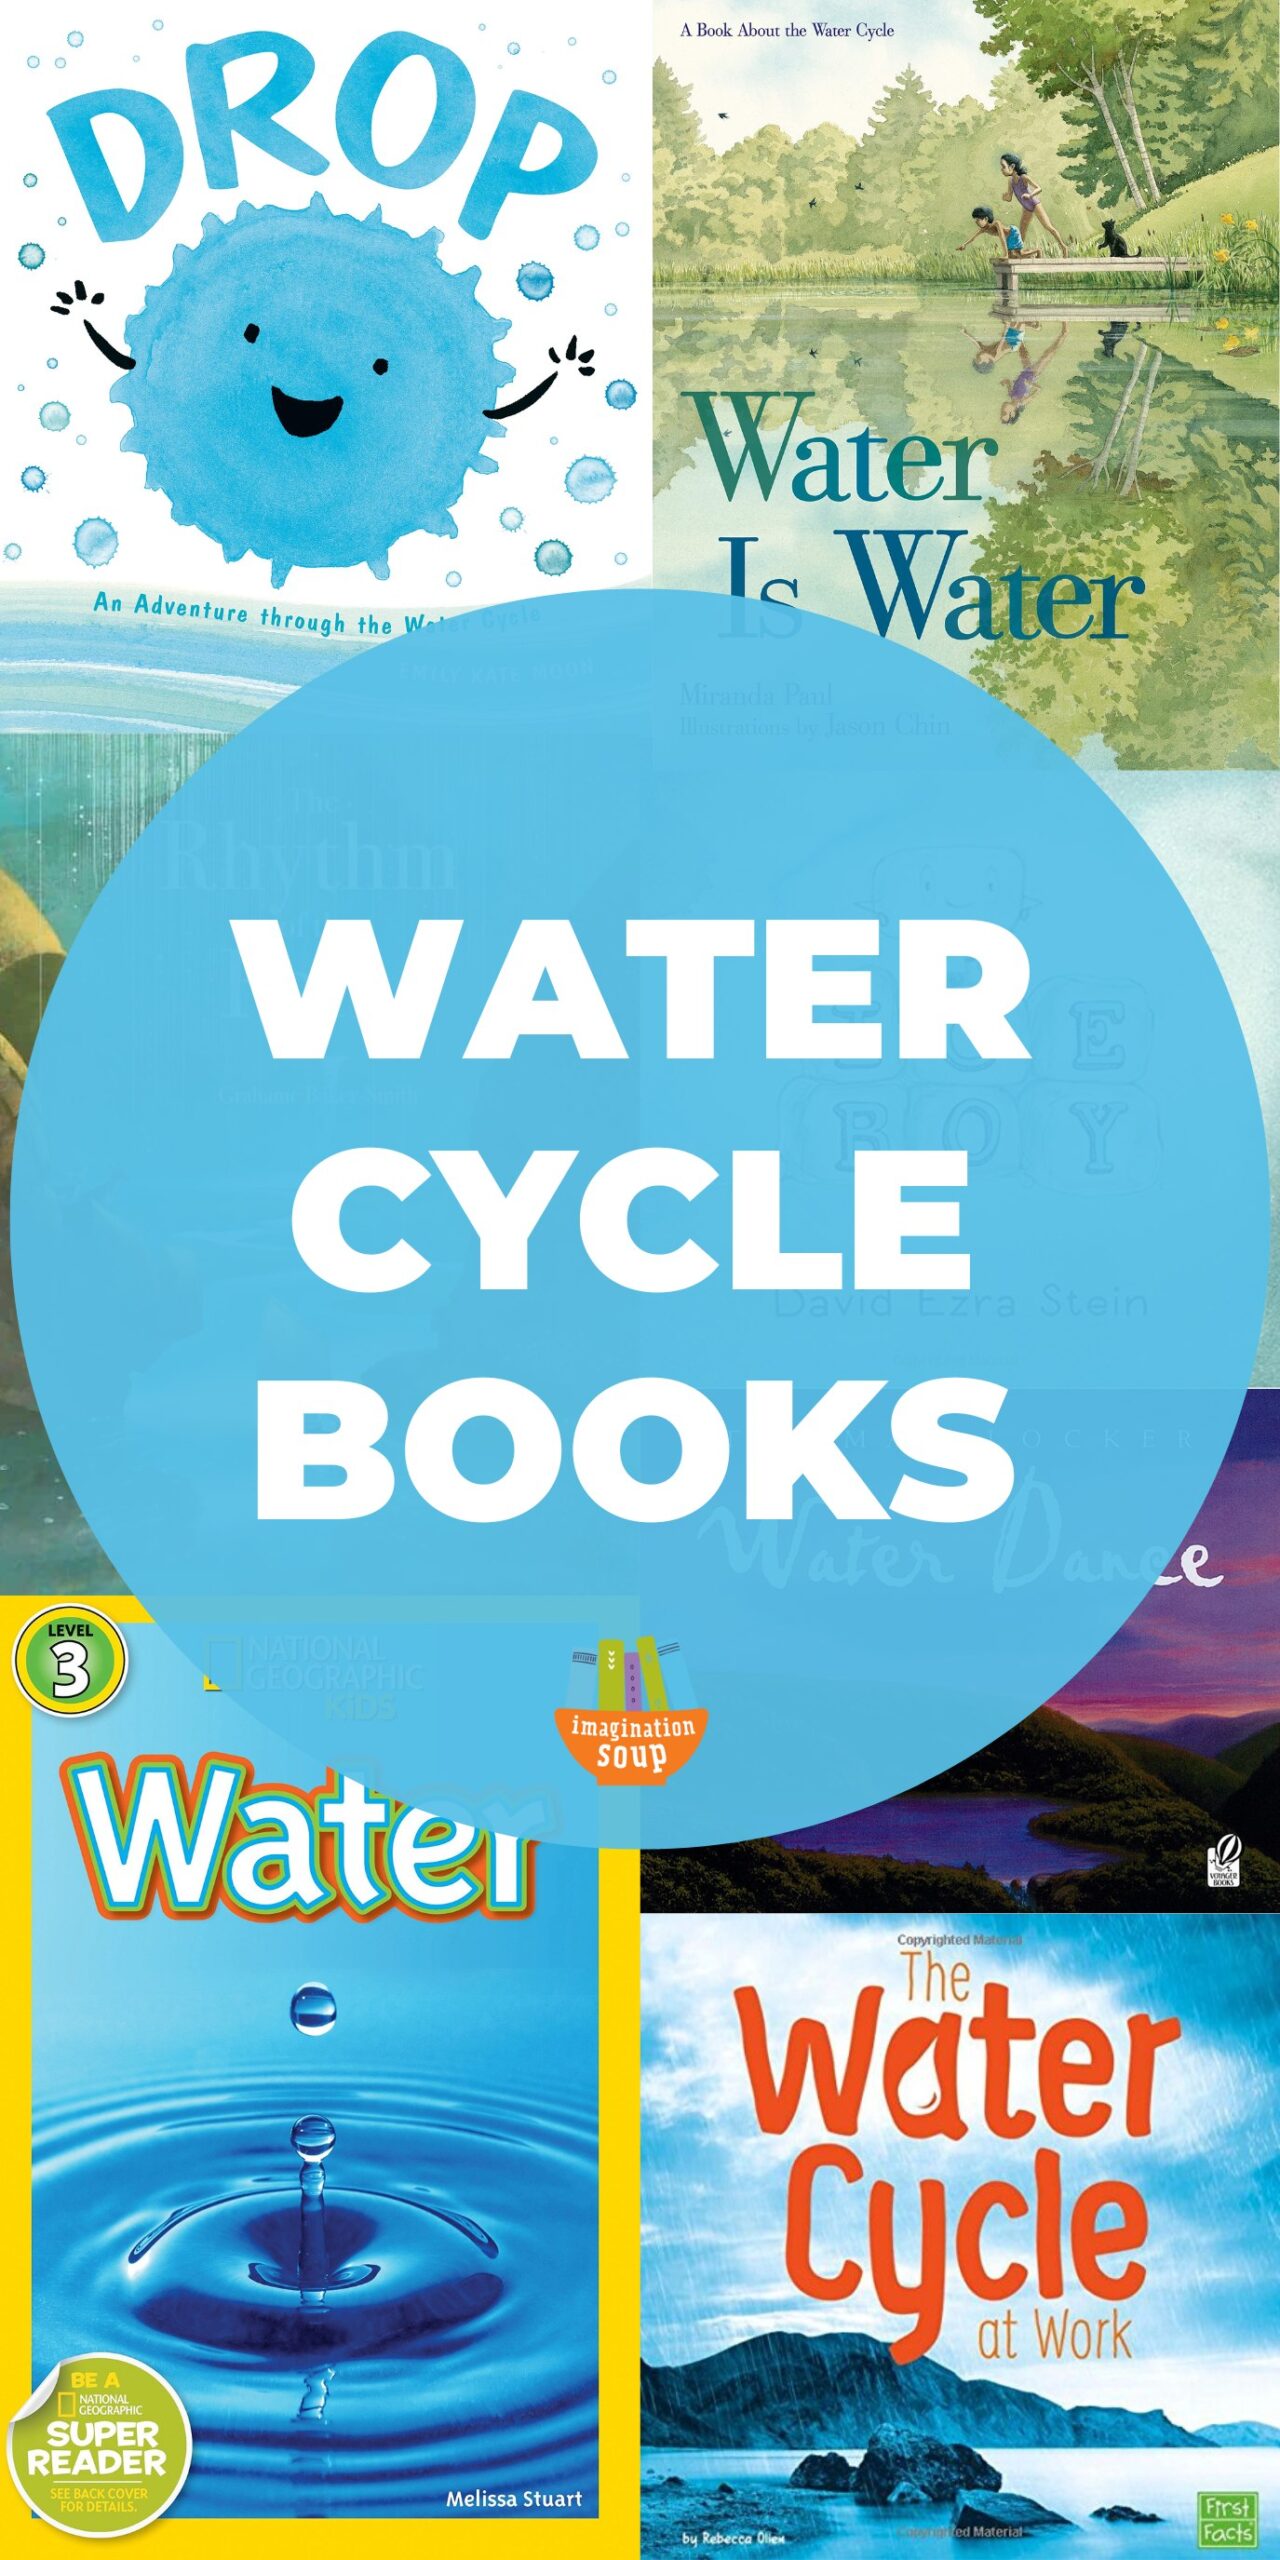 Do your kids know about the water cycle? If you're ready to introduce the water cycle for kids or to review it, start with one or more of the nonfiction and fiction picture books on this list.

After you read books and talk about what they learned, define what the water cycle is, and get into the specifics of the science including the diagrams (see one here) and definitions.